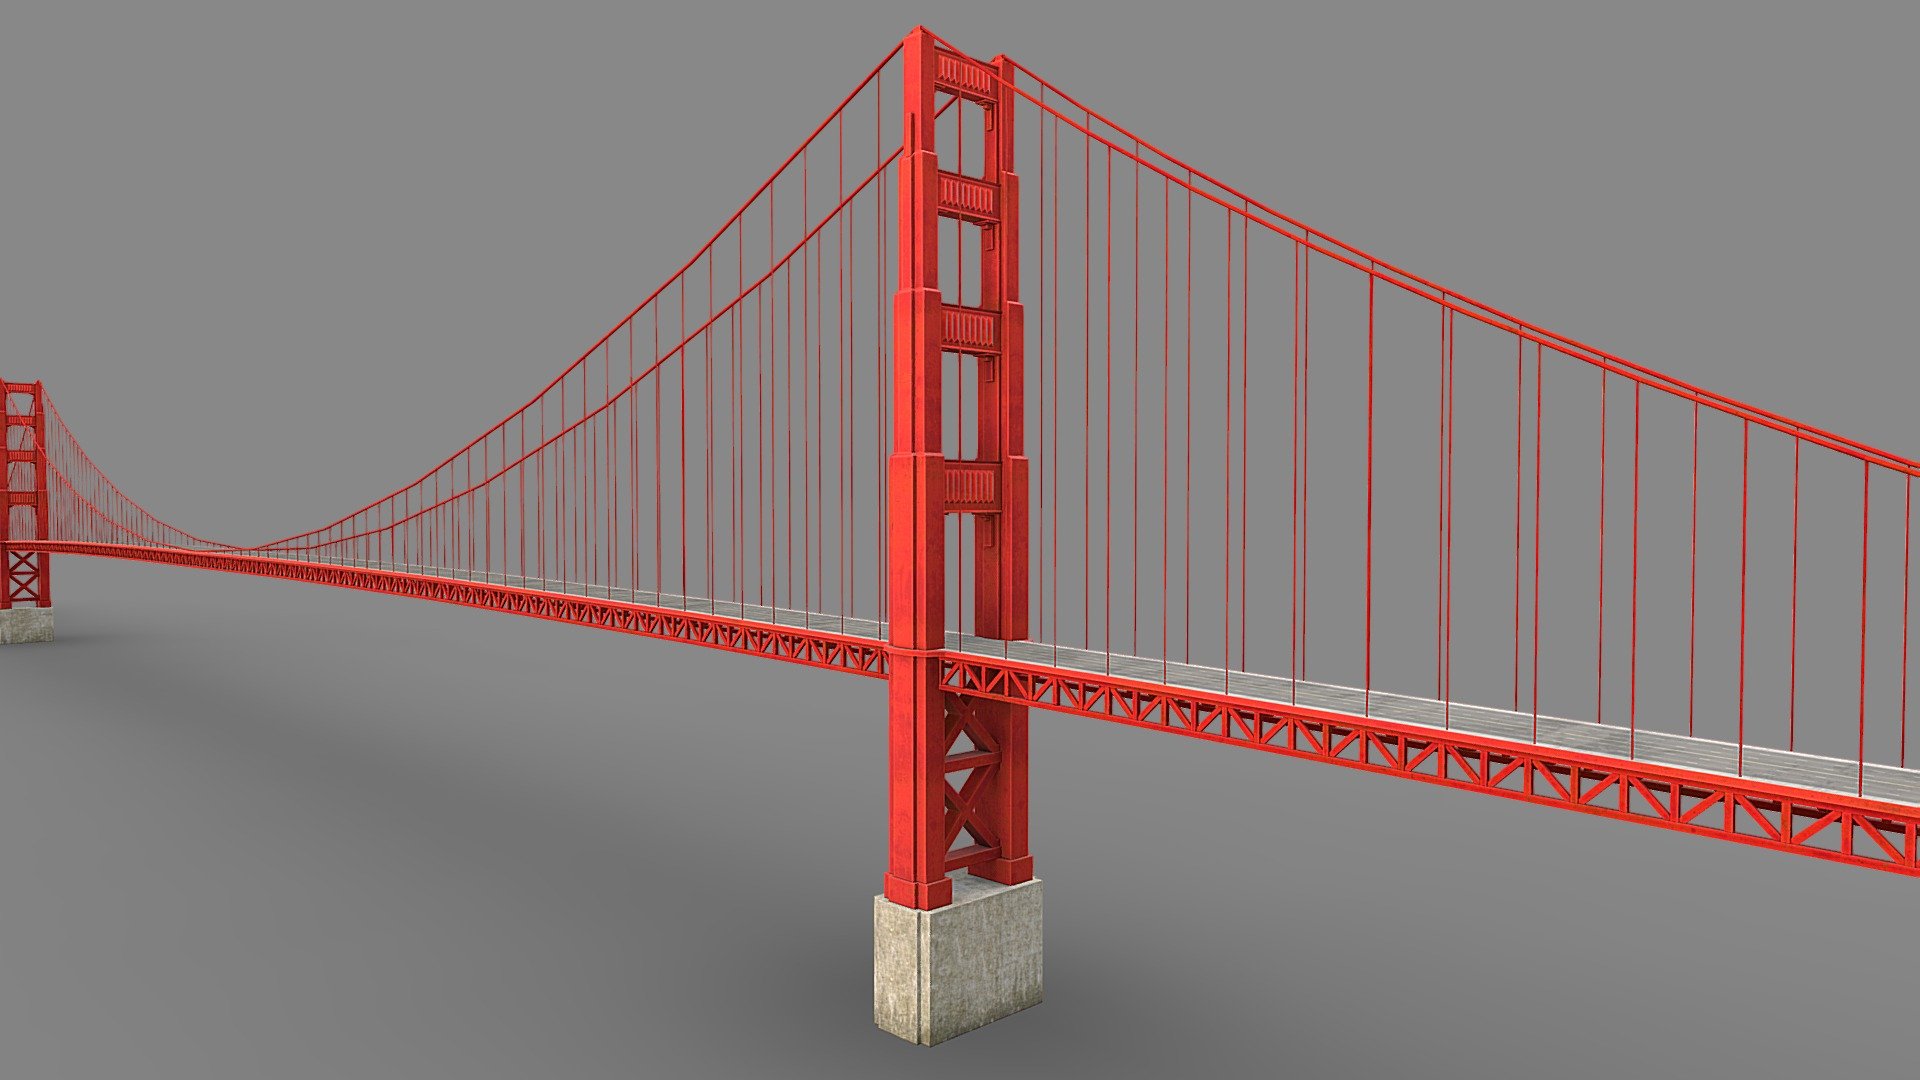 Low Poly Golden Gate Bridge San Francisco

Part of collection:




https://skfb.ly/oUnnv

Details:




High fidelity, game ready, realtime optimized

Made in real world scale meters

Unwrapped on 1 UV layout with mixed technique

Bridge non-overlapping unwrapped, road seamless

Pivot placed on waterline

Ideal as good quality background object

Textures:




3 x textures in native 2K

Included are base diffuse, specular diffuse and gloss

Triangle count:




Complete 17.664 tris
 - Low Poly Golden Gate Bridge San Francisco - Buy Royalty Free 3D model by 3dgtx 3d model